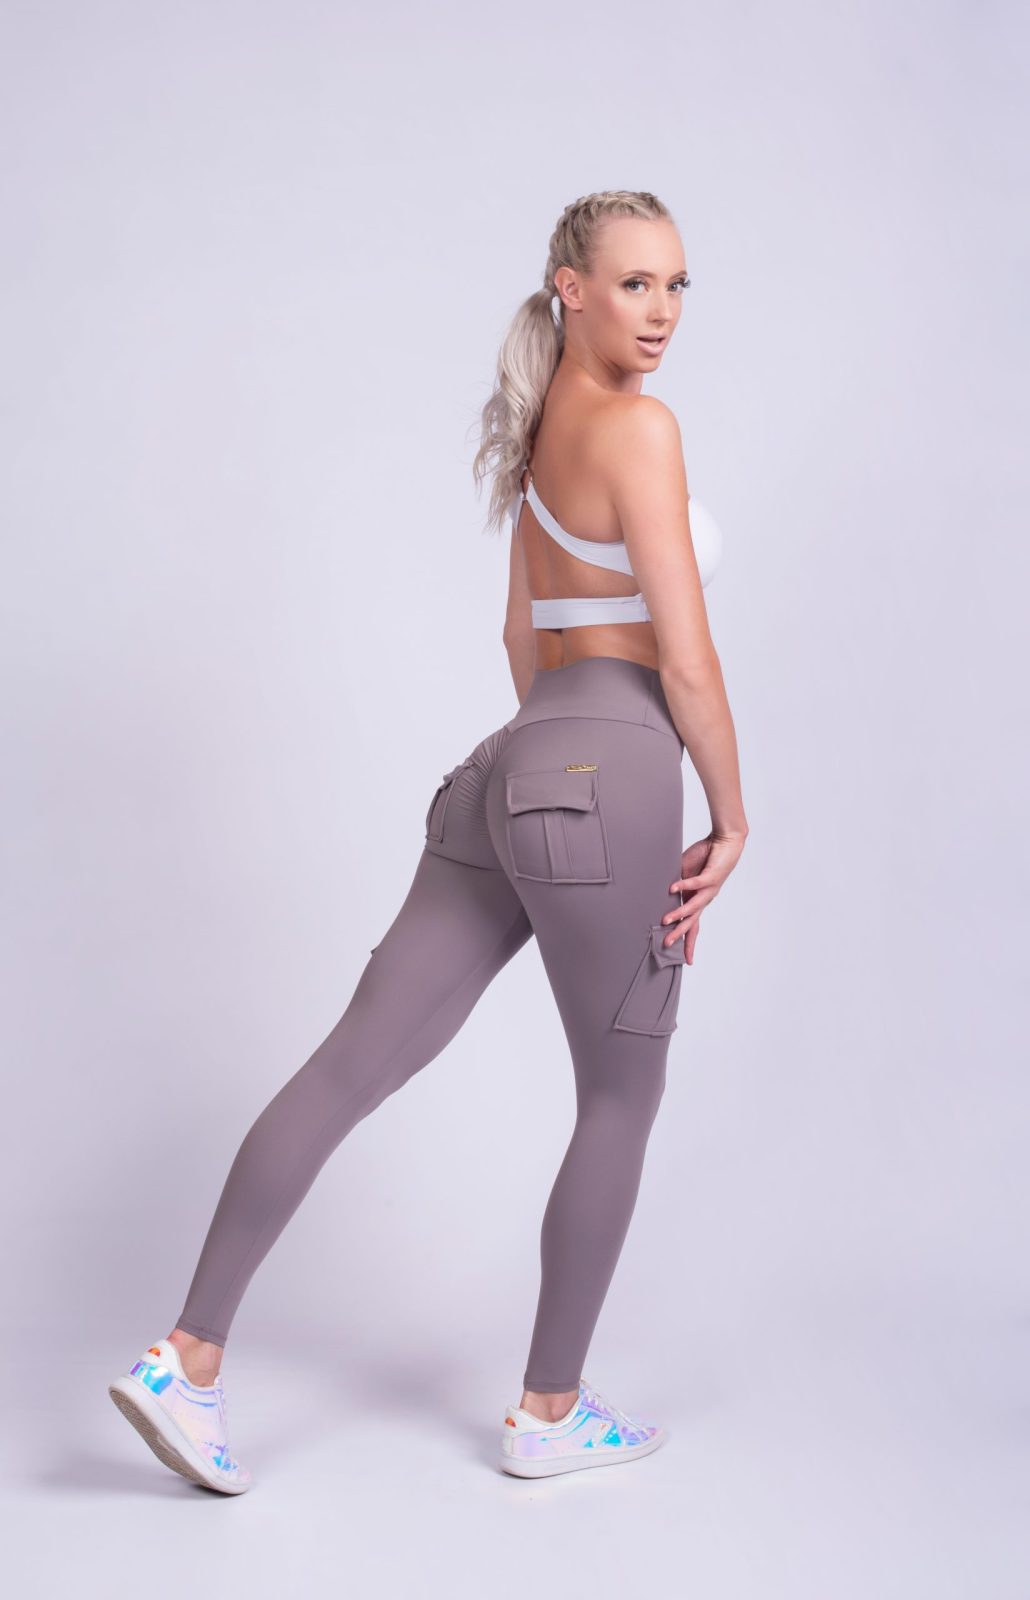 https://millionmama.co.za/wp-content/uploads/2021/05/Grey-Outfit-2-1-scaled.jpg